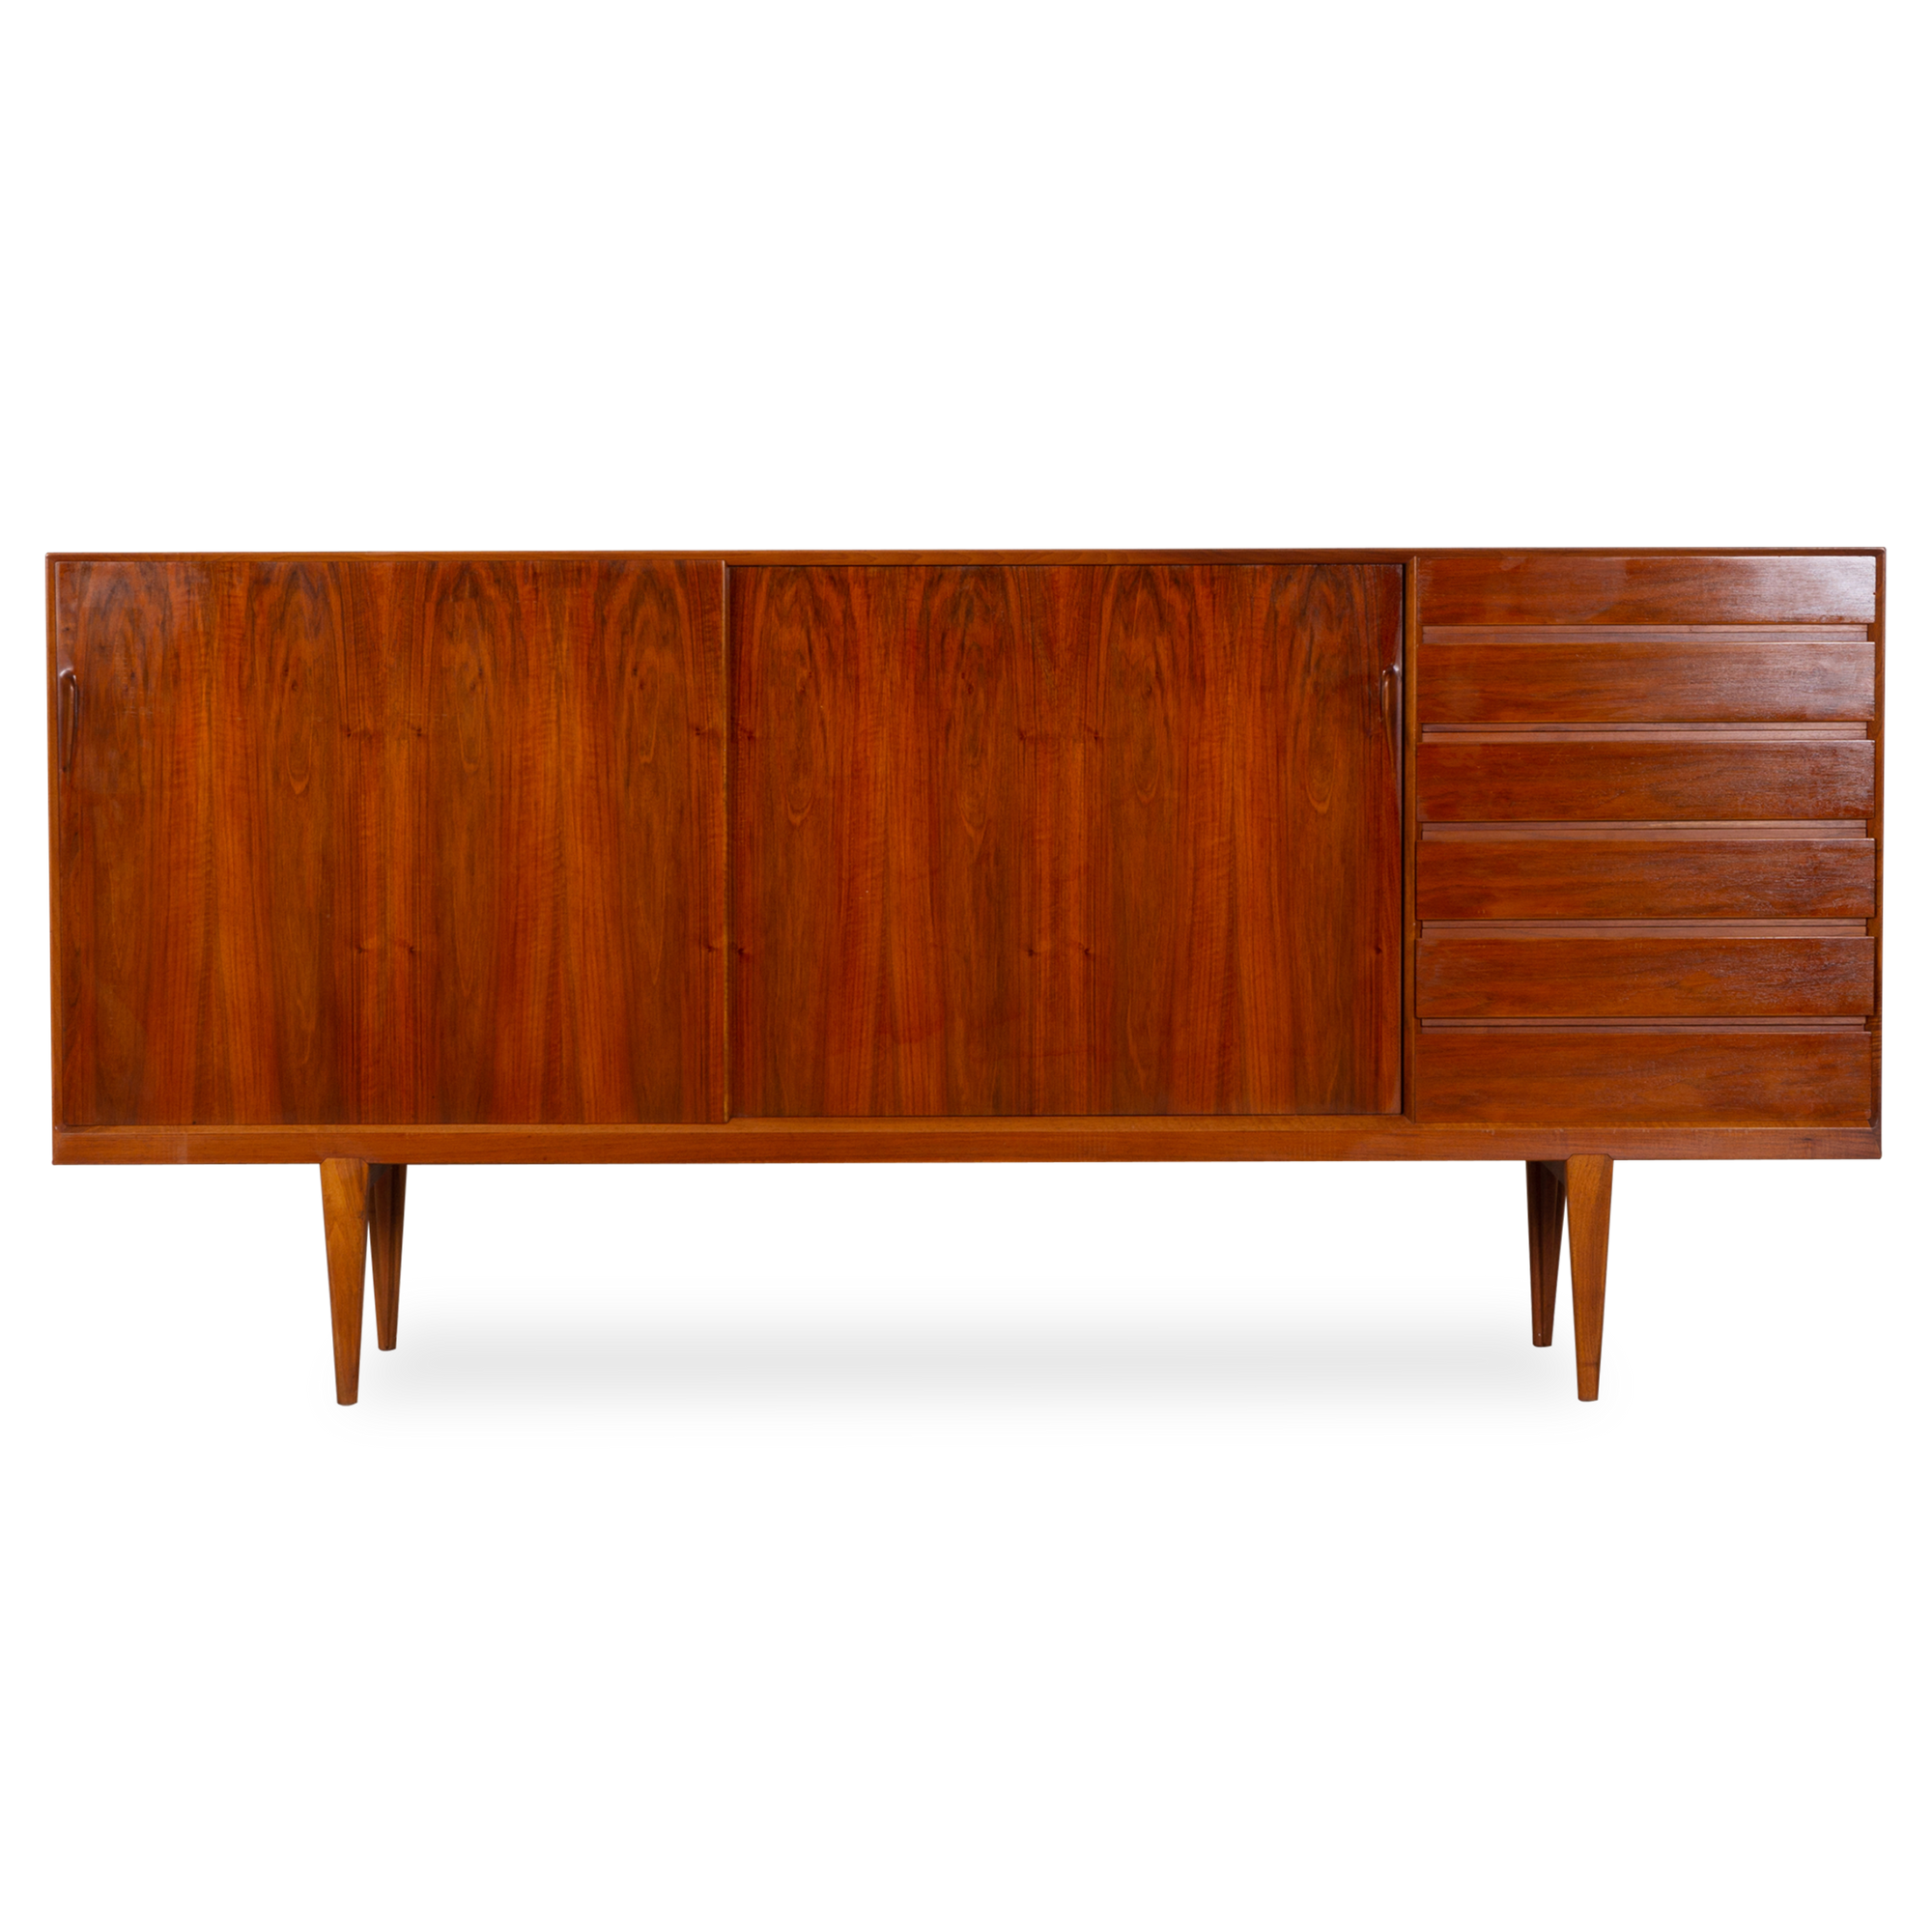 Displaying an richly aged finish, this vintage sideboard was designed by Henry Rosengren Hansen and was manufactured by Brande Mobelindustri, circa 1960s.